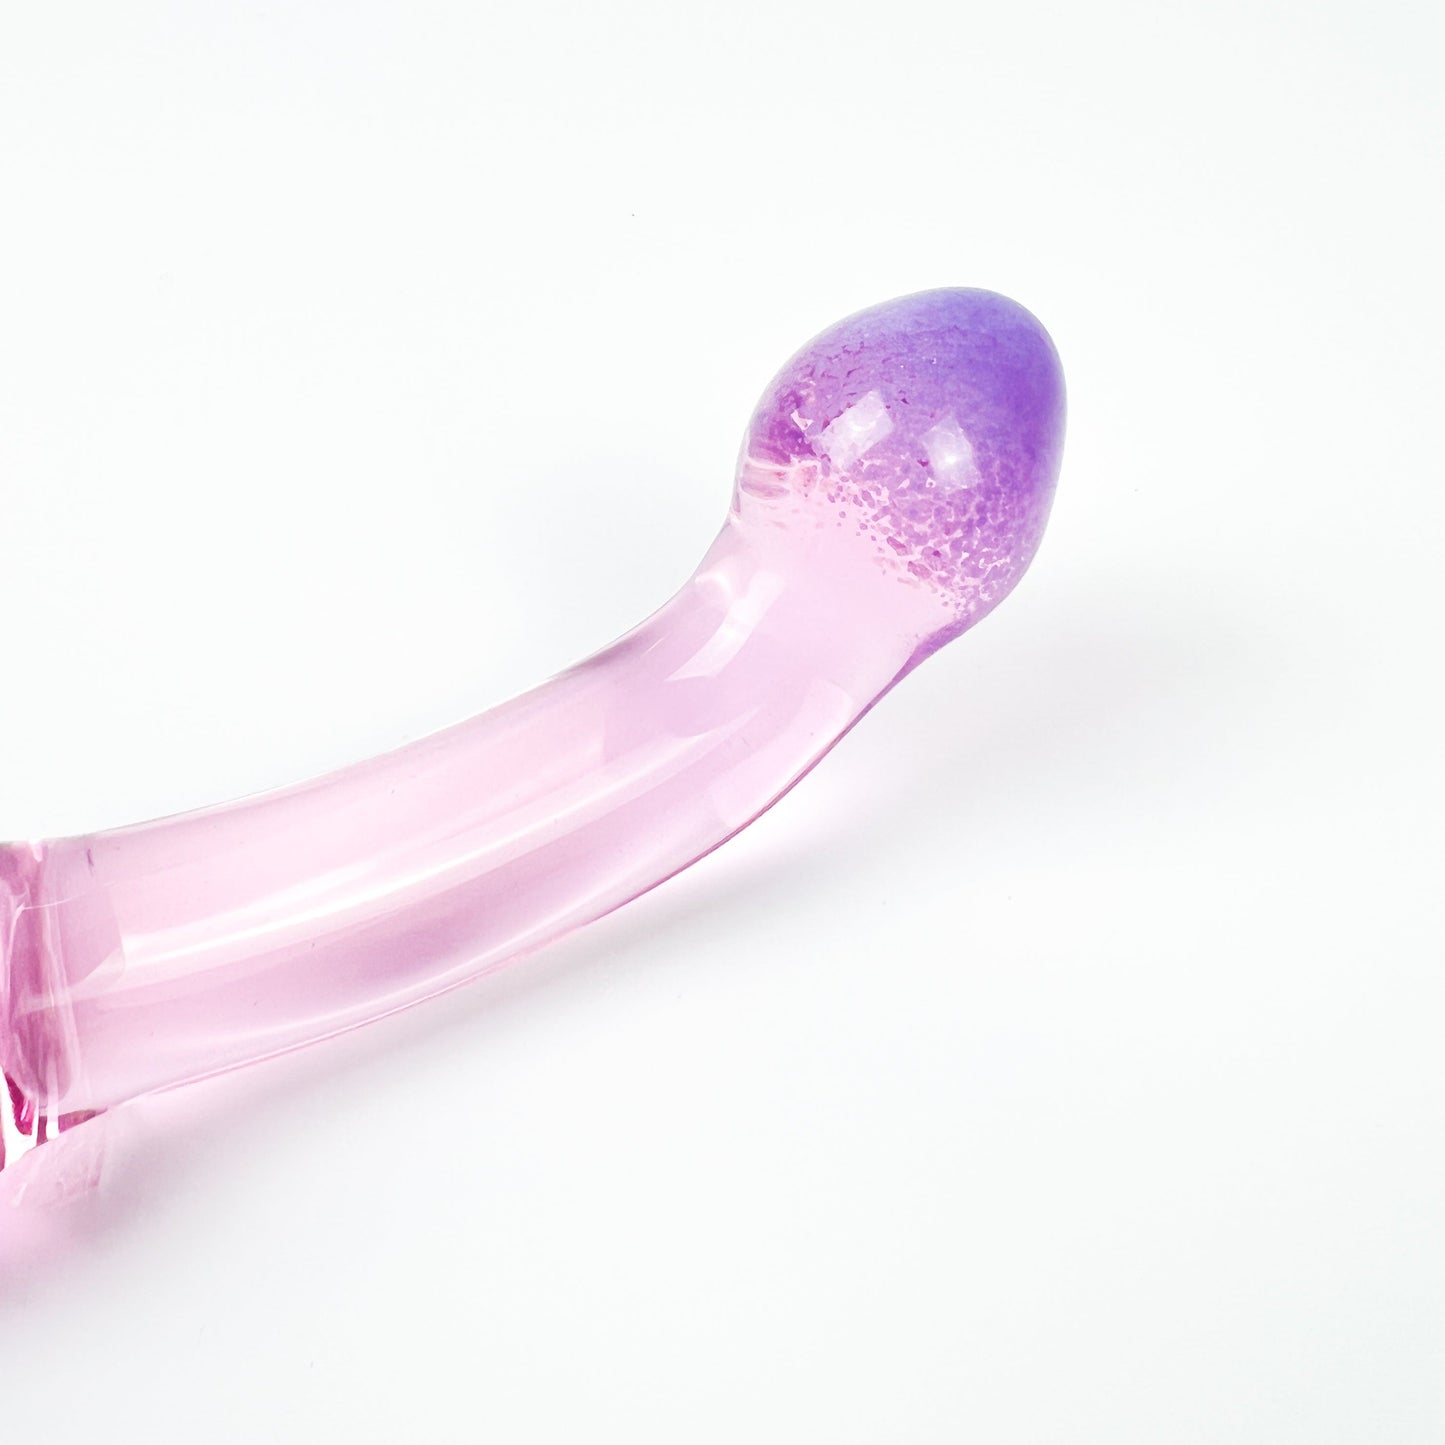 Purple Lust Pink Curved Dildo Sensual Pussy Play Sex Toy